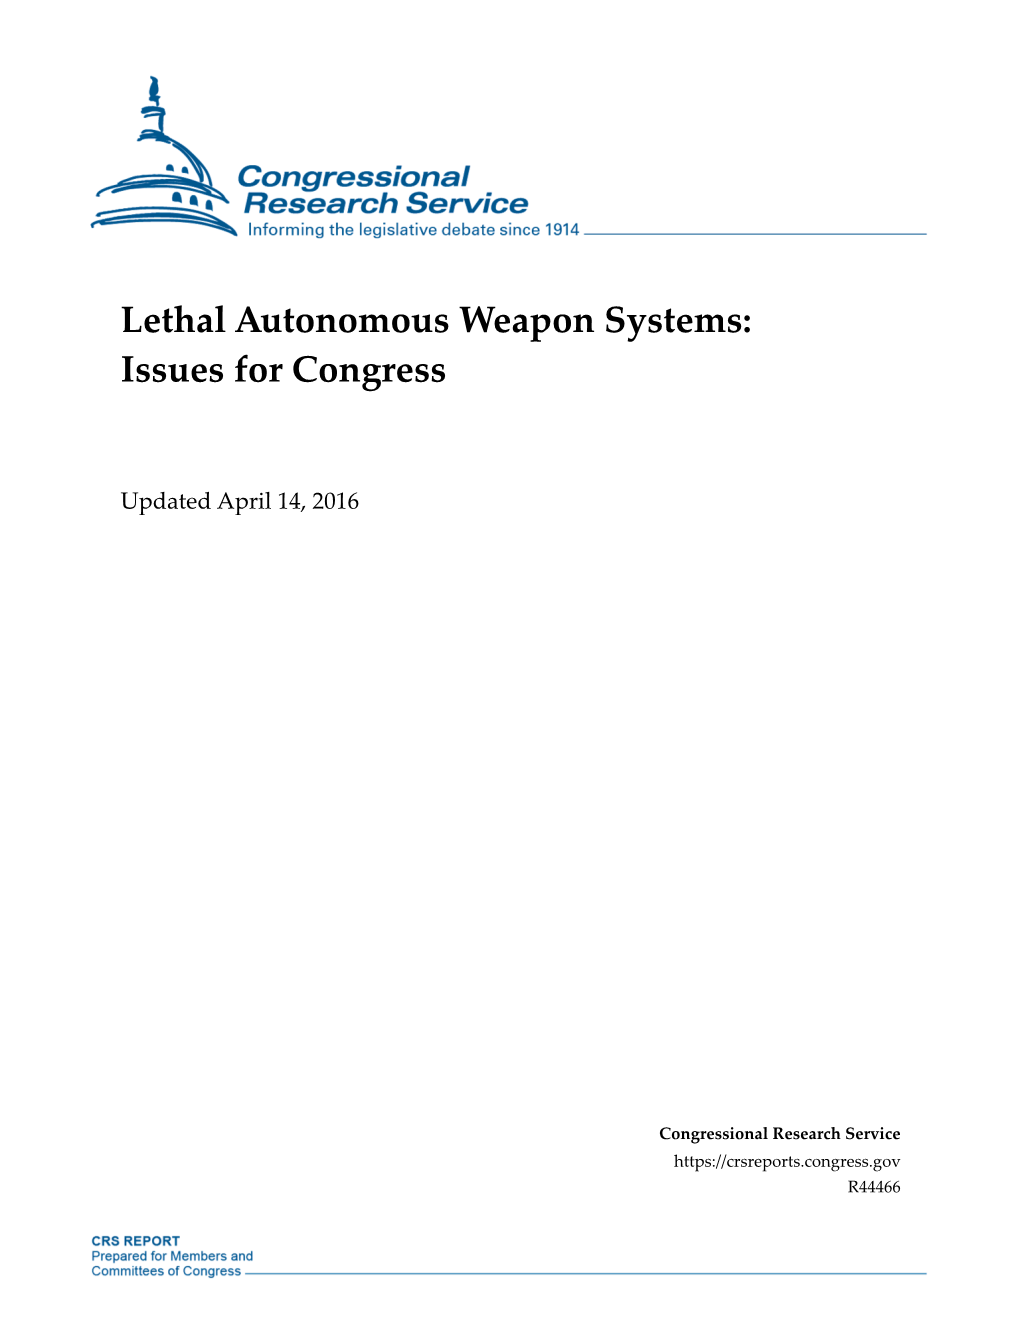 Lethal Autonomous Weapon Systems: Issues for Congress